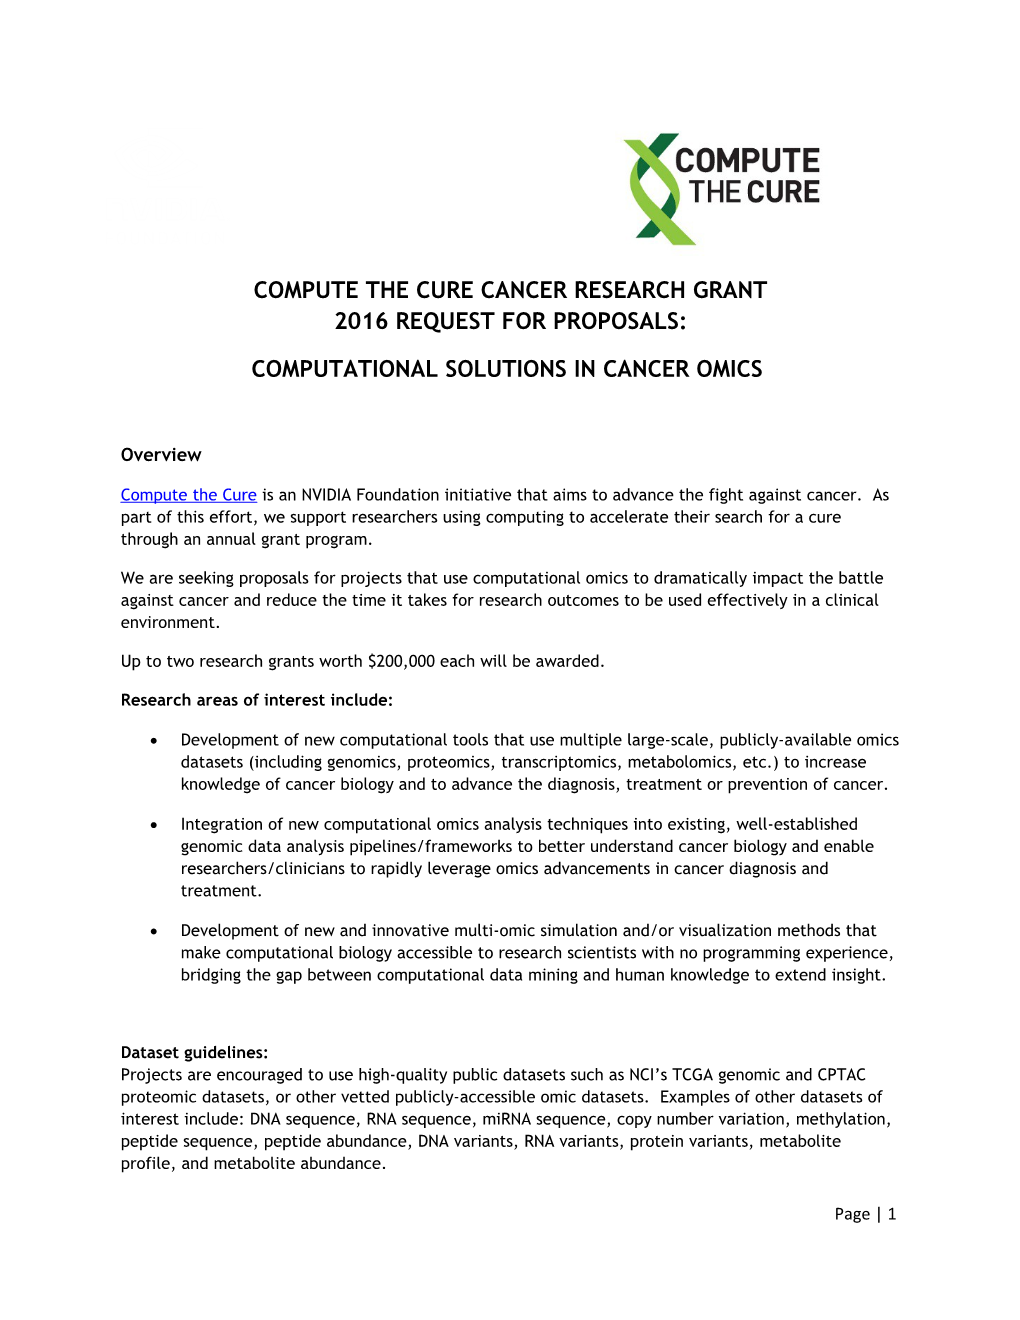 Compute the Cure Cancer Research Grant 2016 Request for Proposals